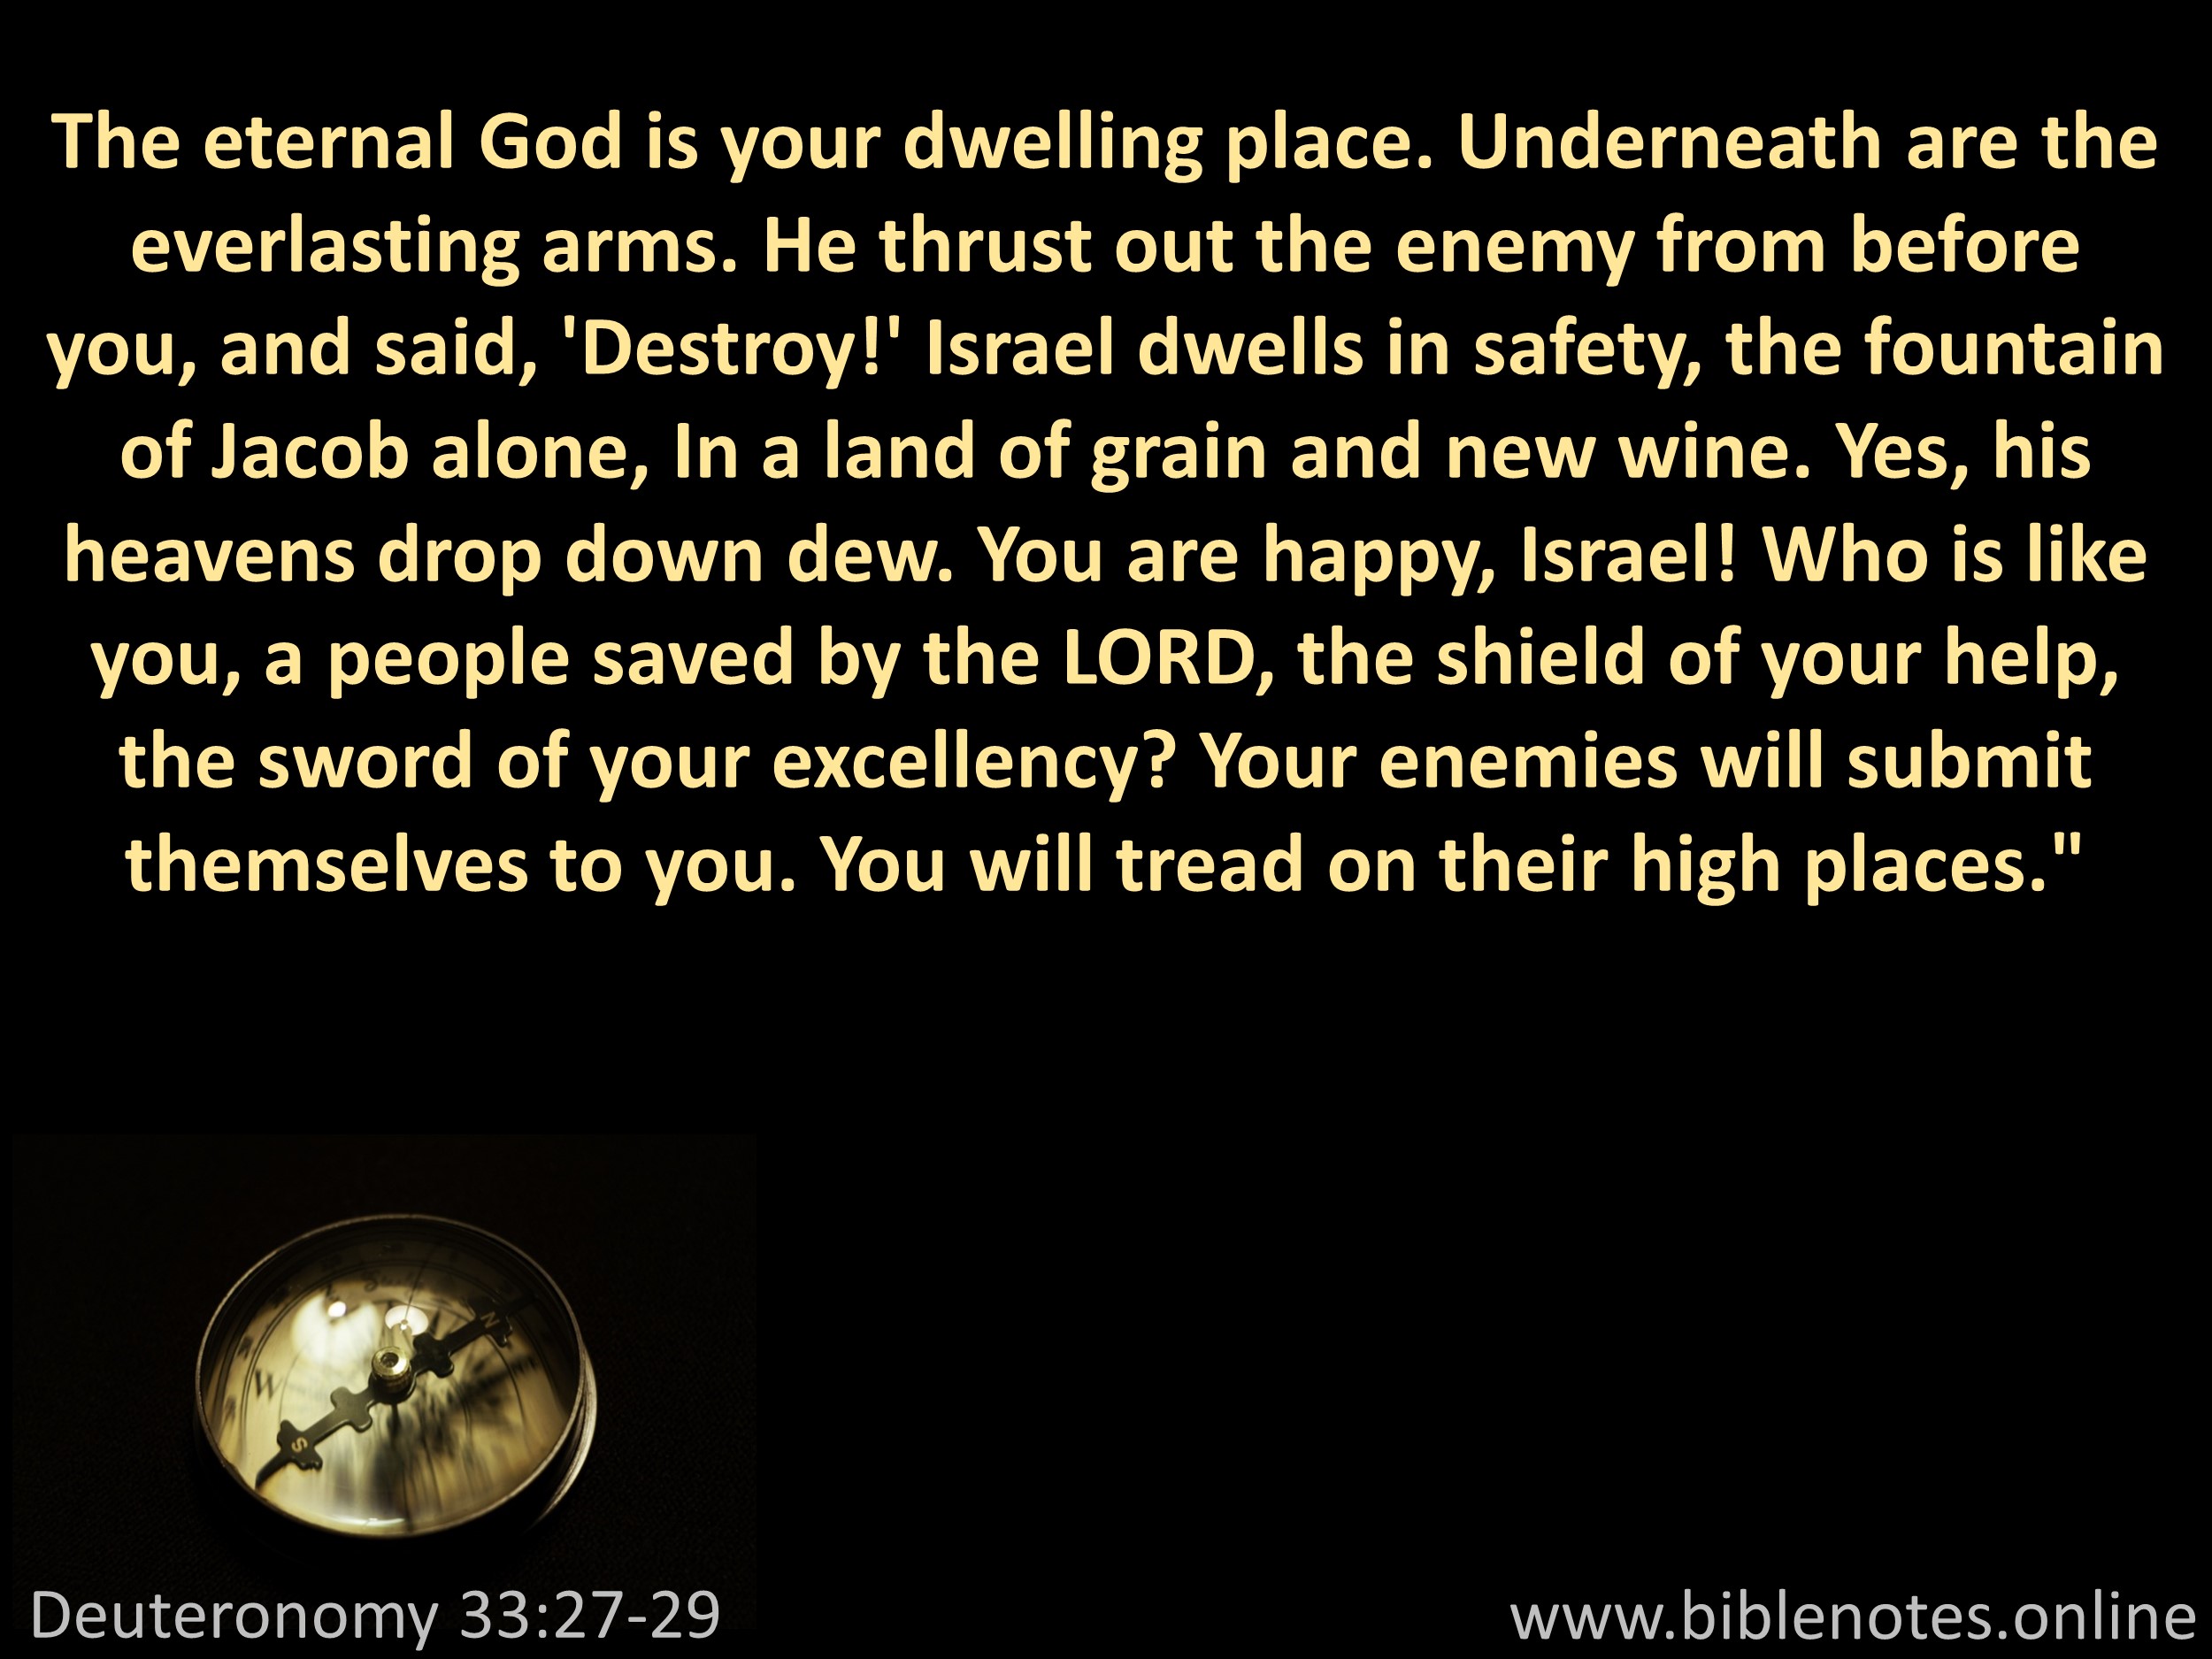 Bible Verse from Deuteronomy Chapter 33